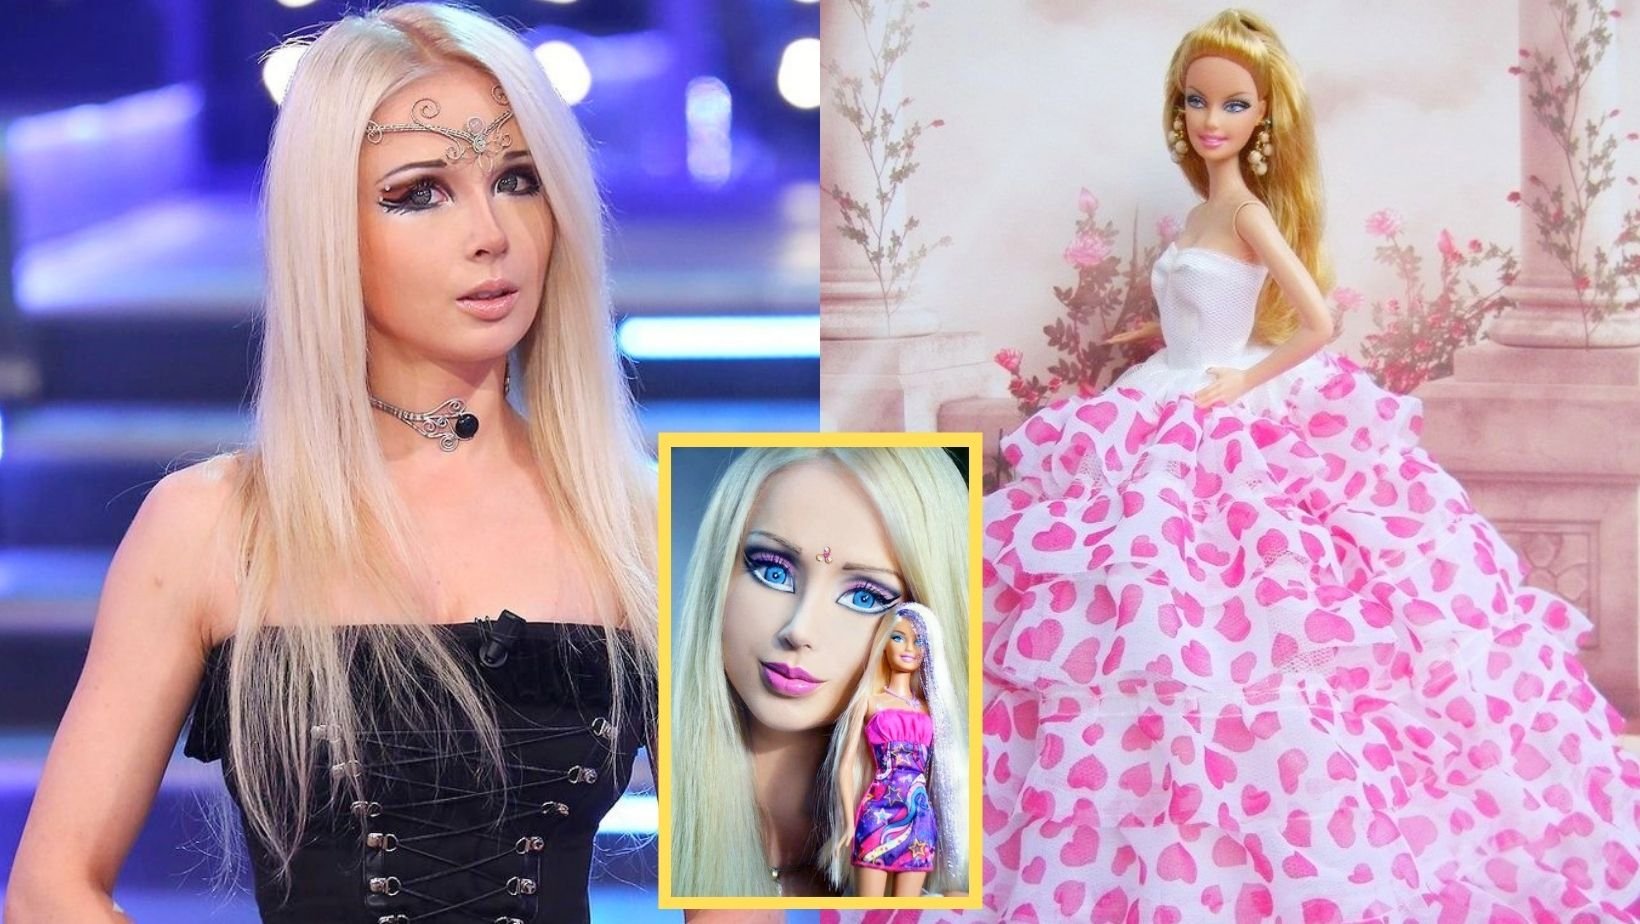 1 26.jpg?resize=1200,630 - 'Human Barbie' Denies Having Plastic Surgery, Claims Her Doll-Like Appearance Is ALL NATURAL